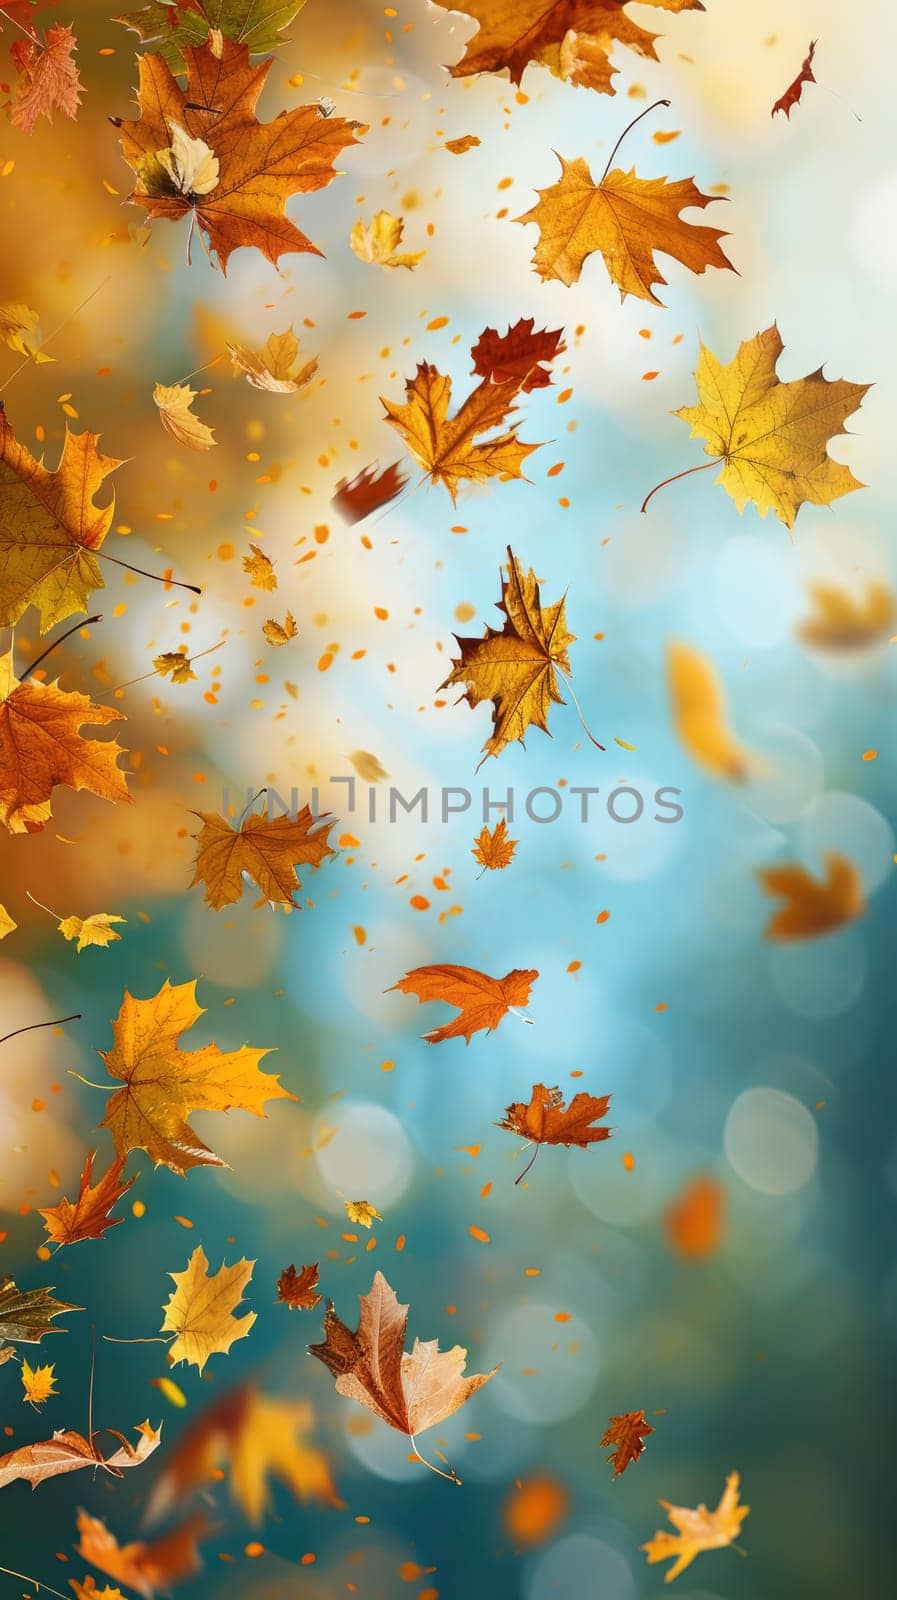 Autumn maple leaves swirling in the wind by Yurich32